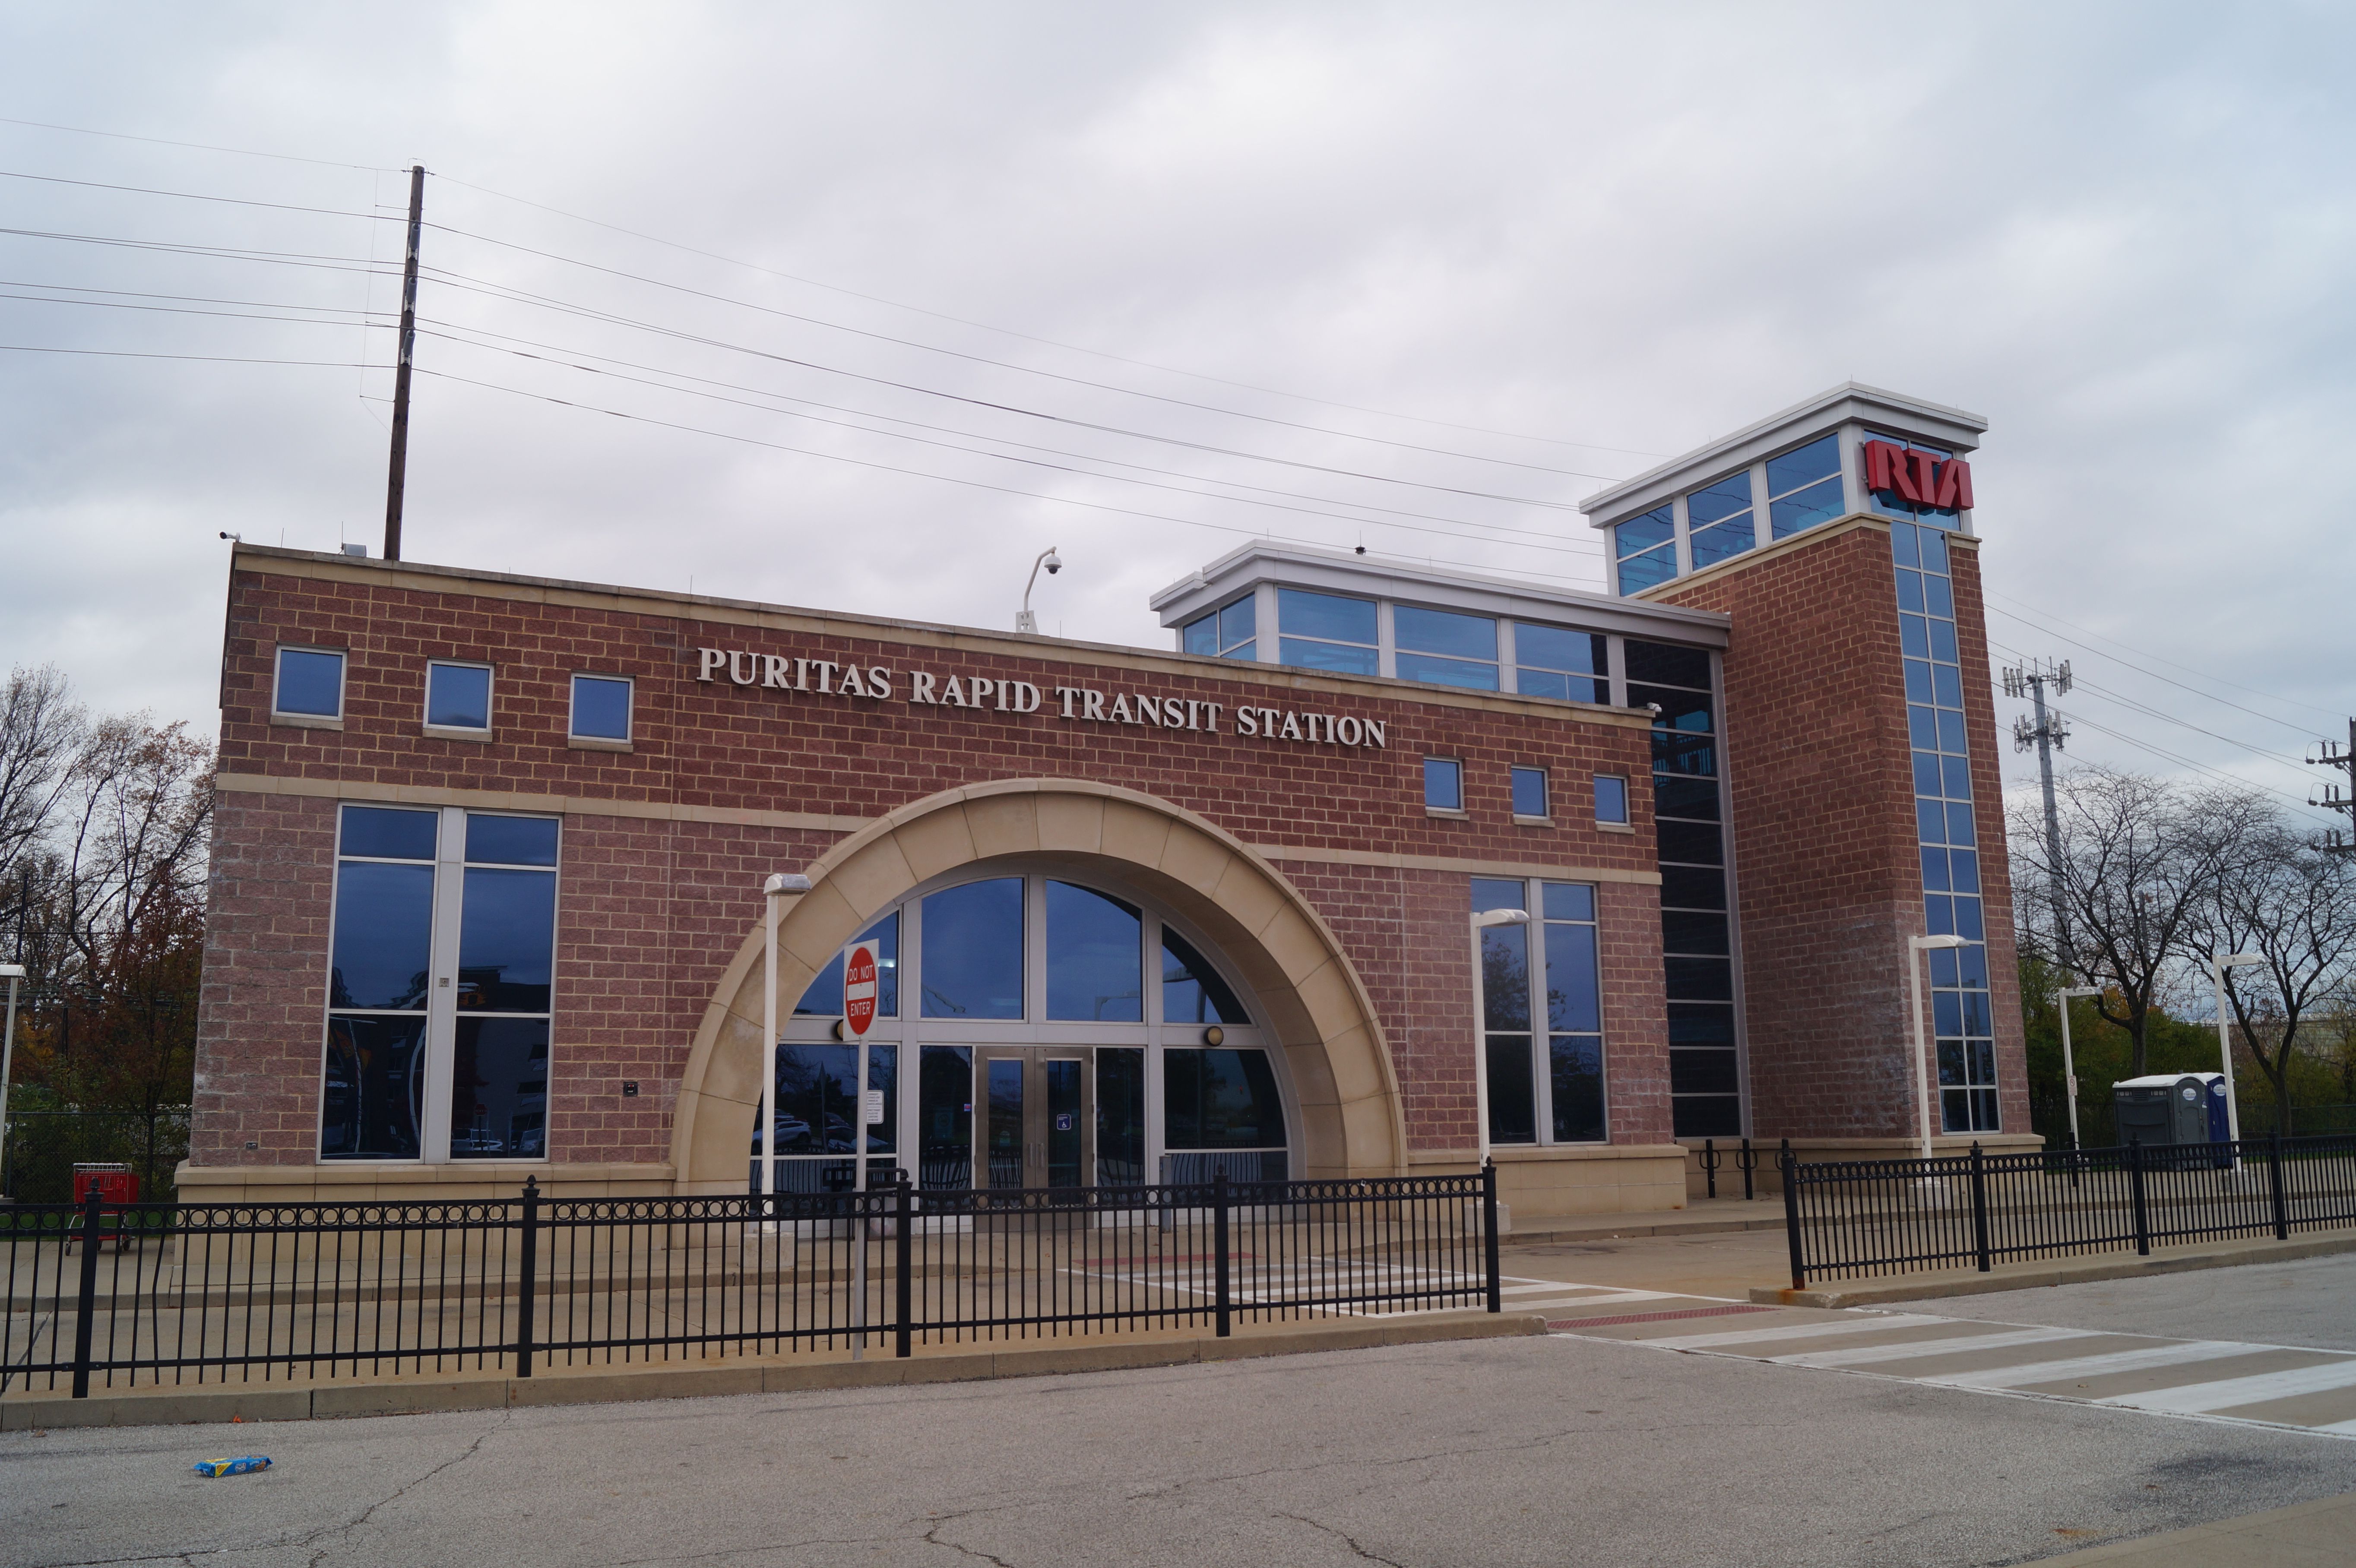 A red brick Cleveland RTA rapid transit station with an arched entryway 